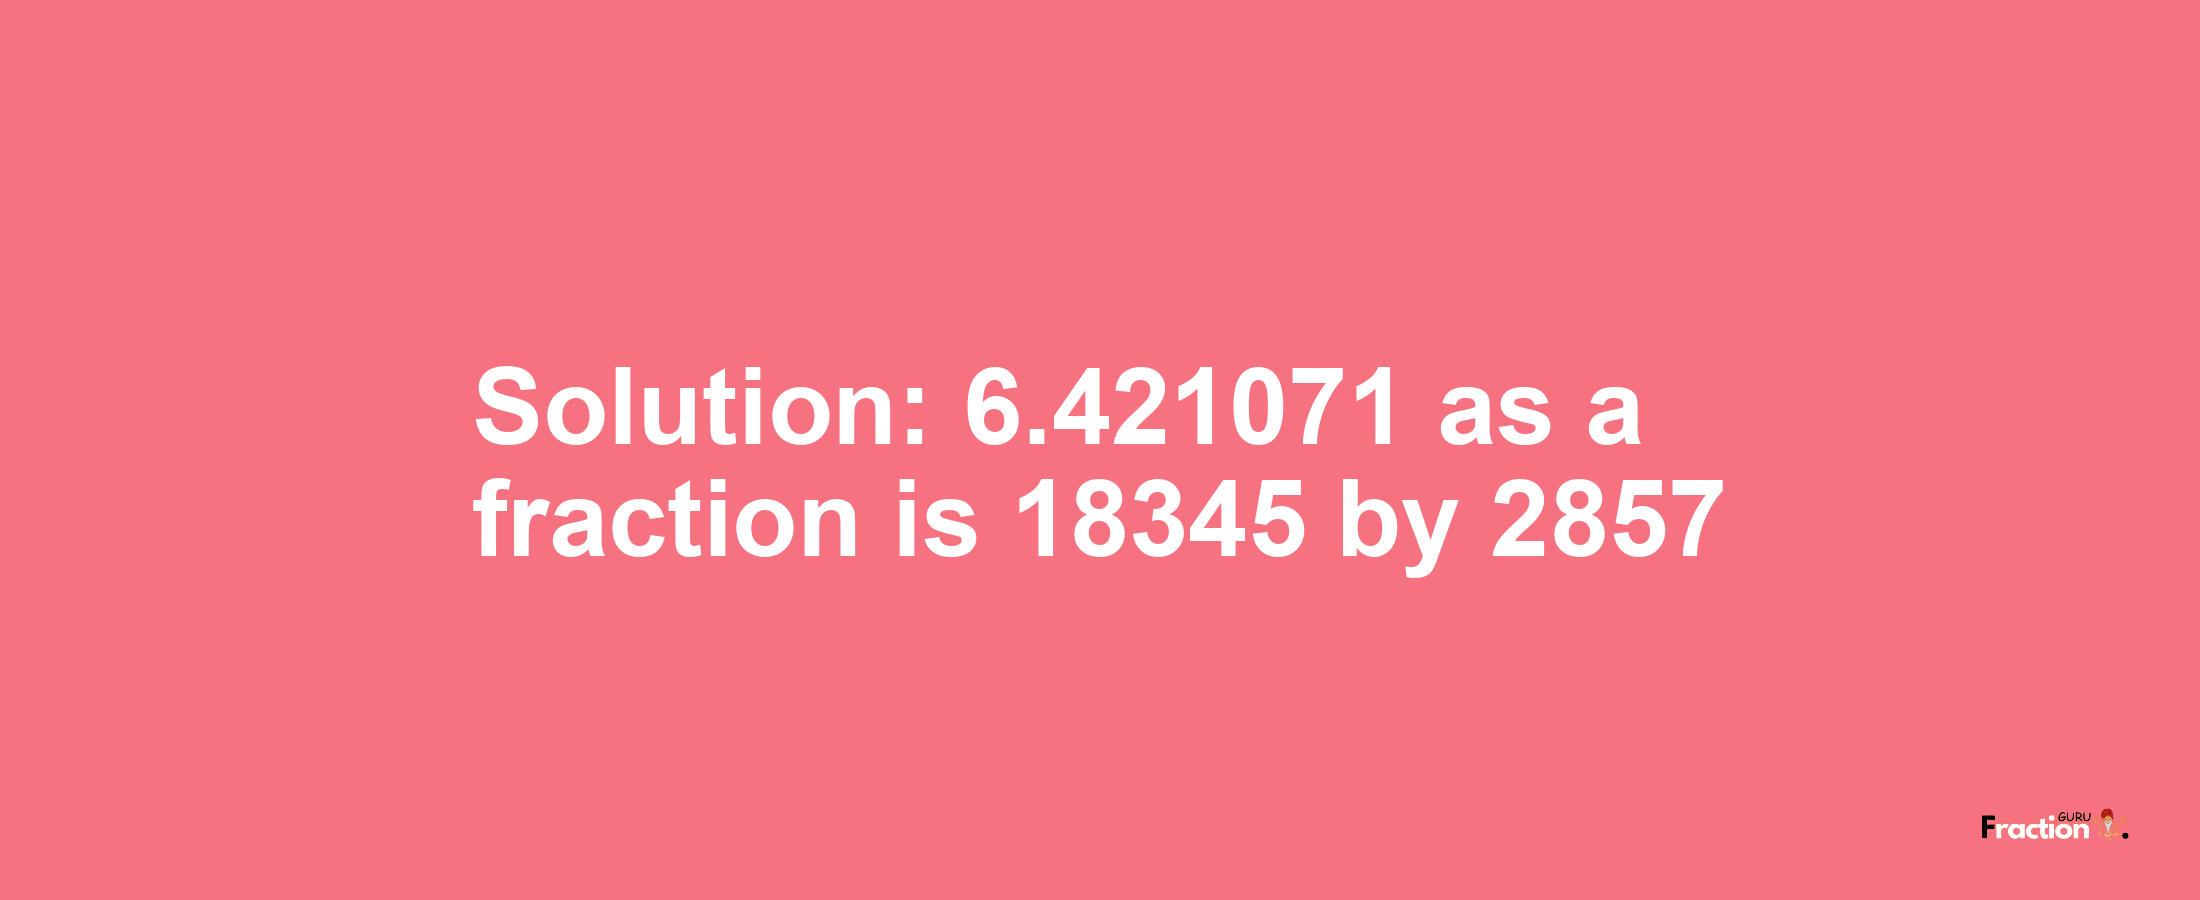 Solution:6.421071 as a fraction is 18345/2857